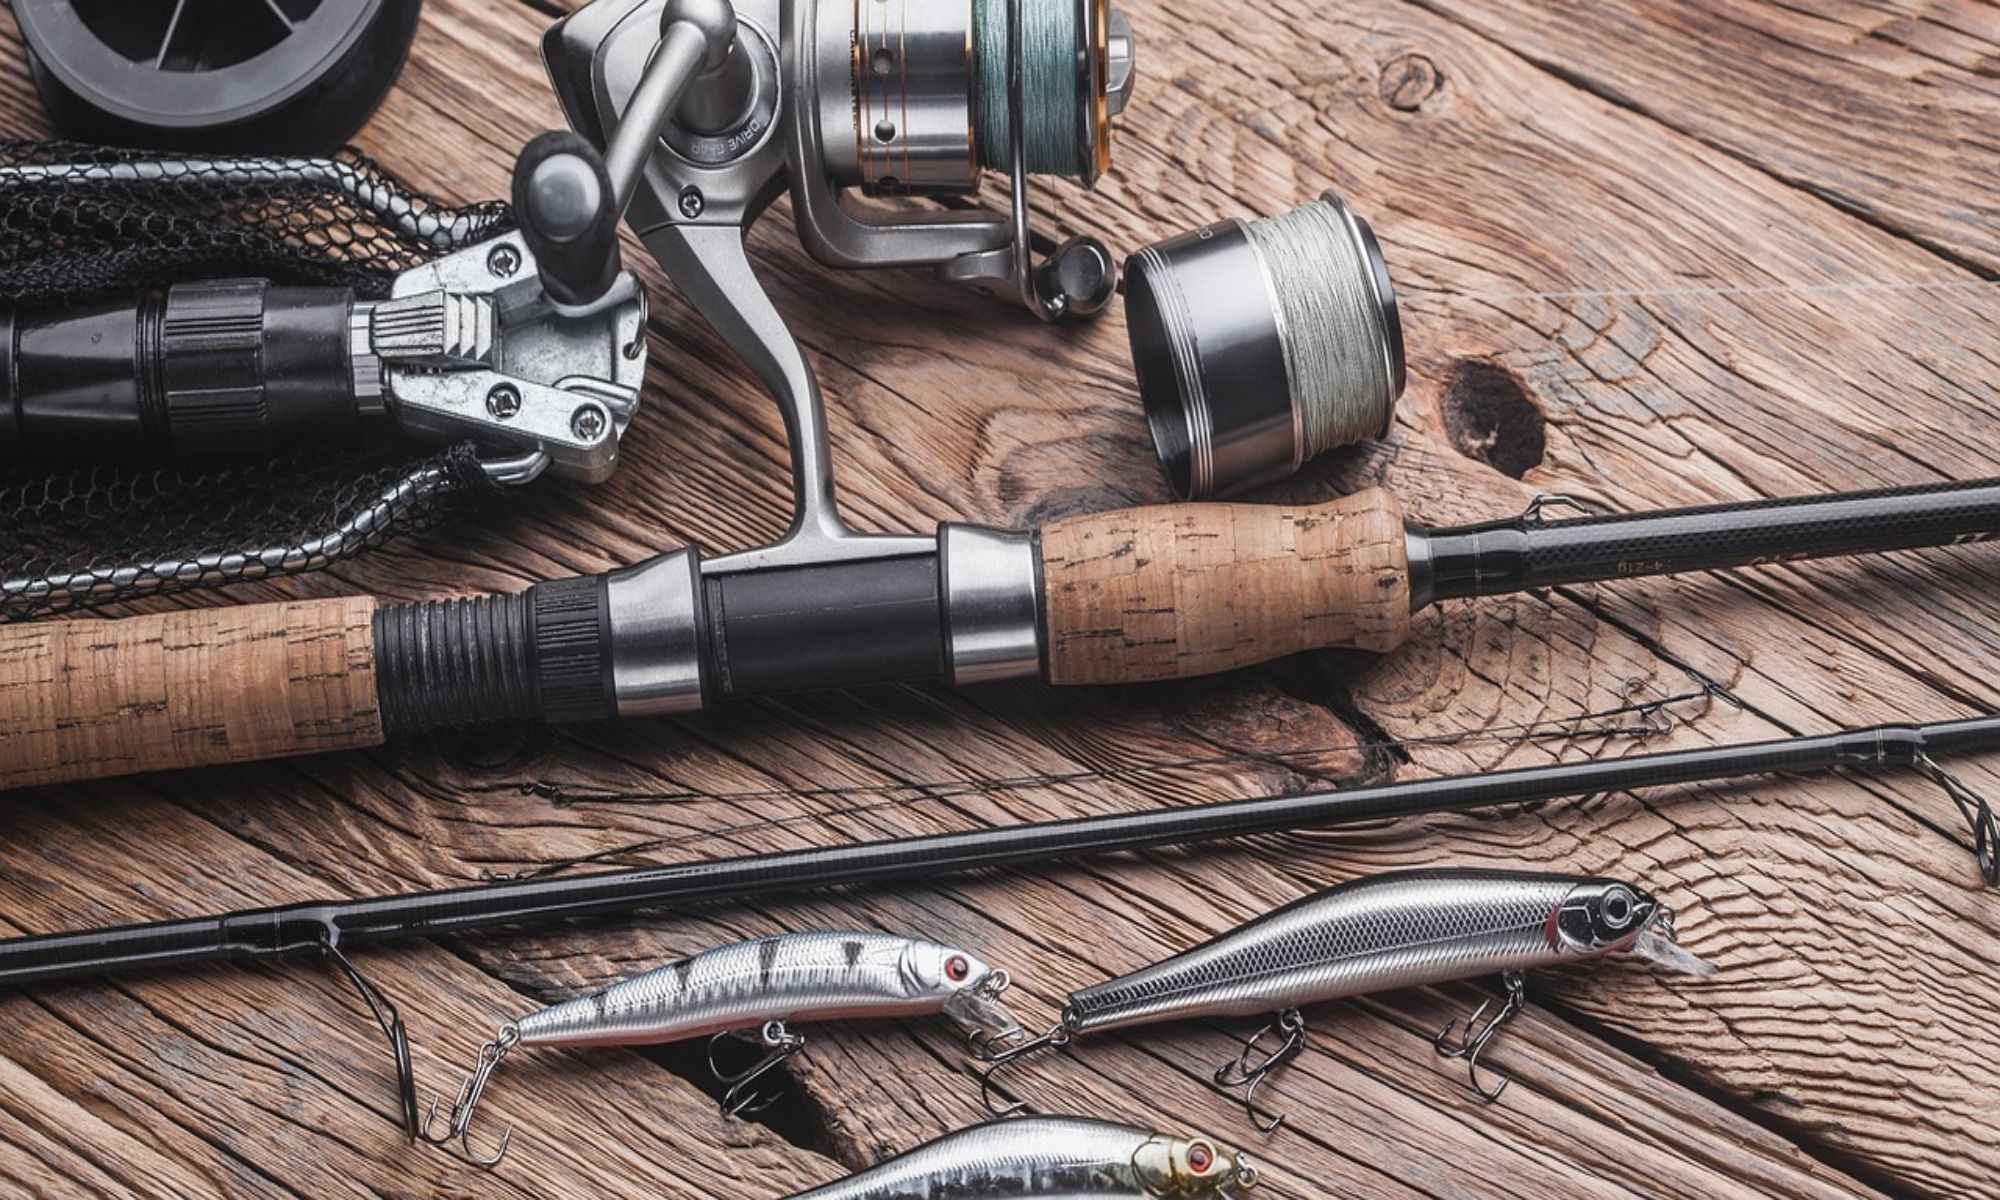  Fly Fishing Gifts